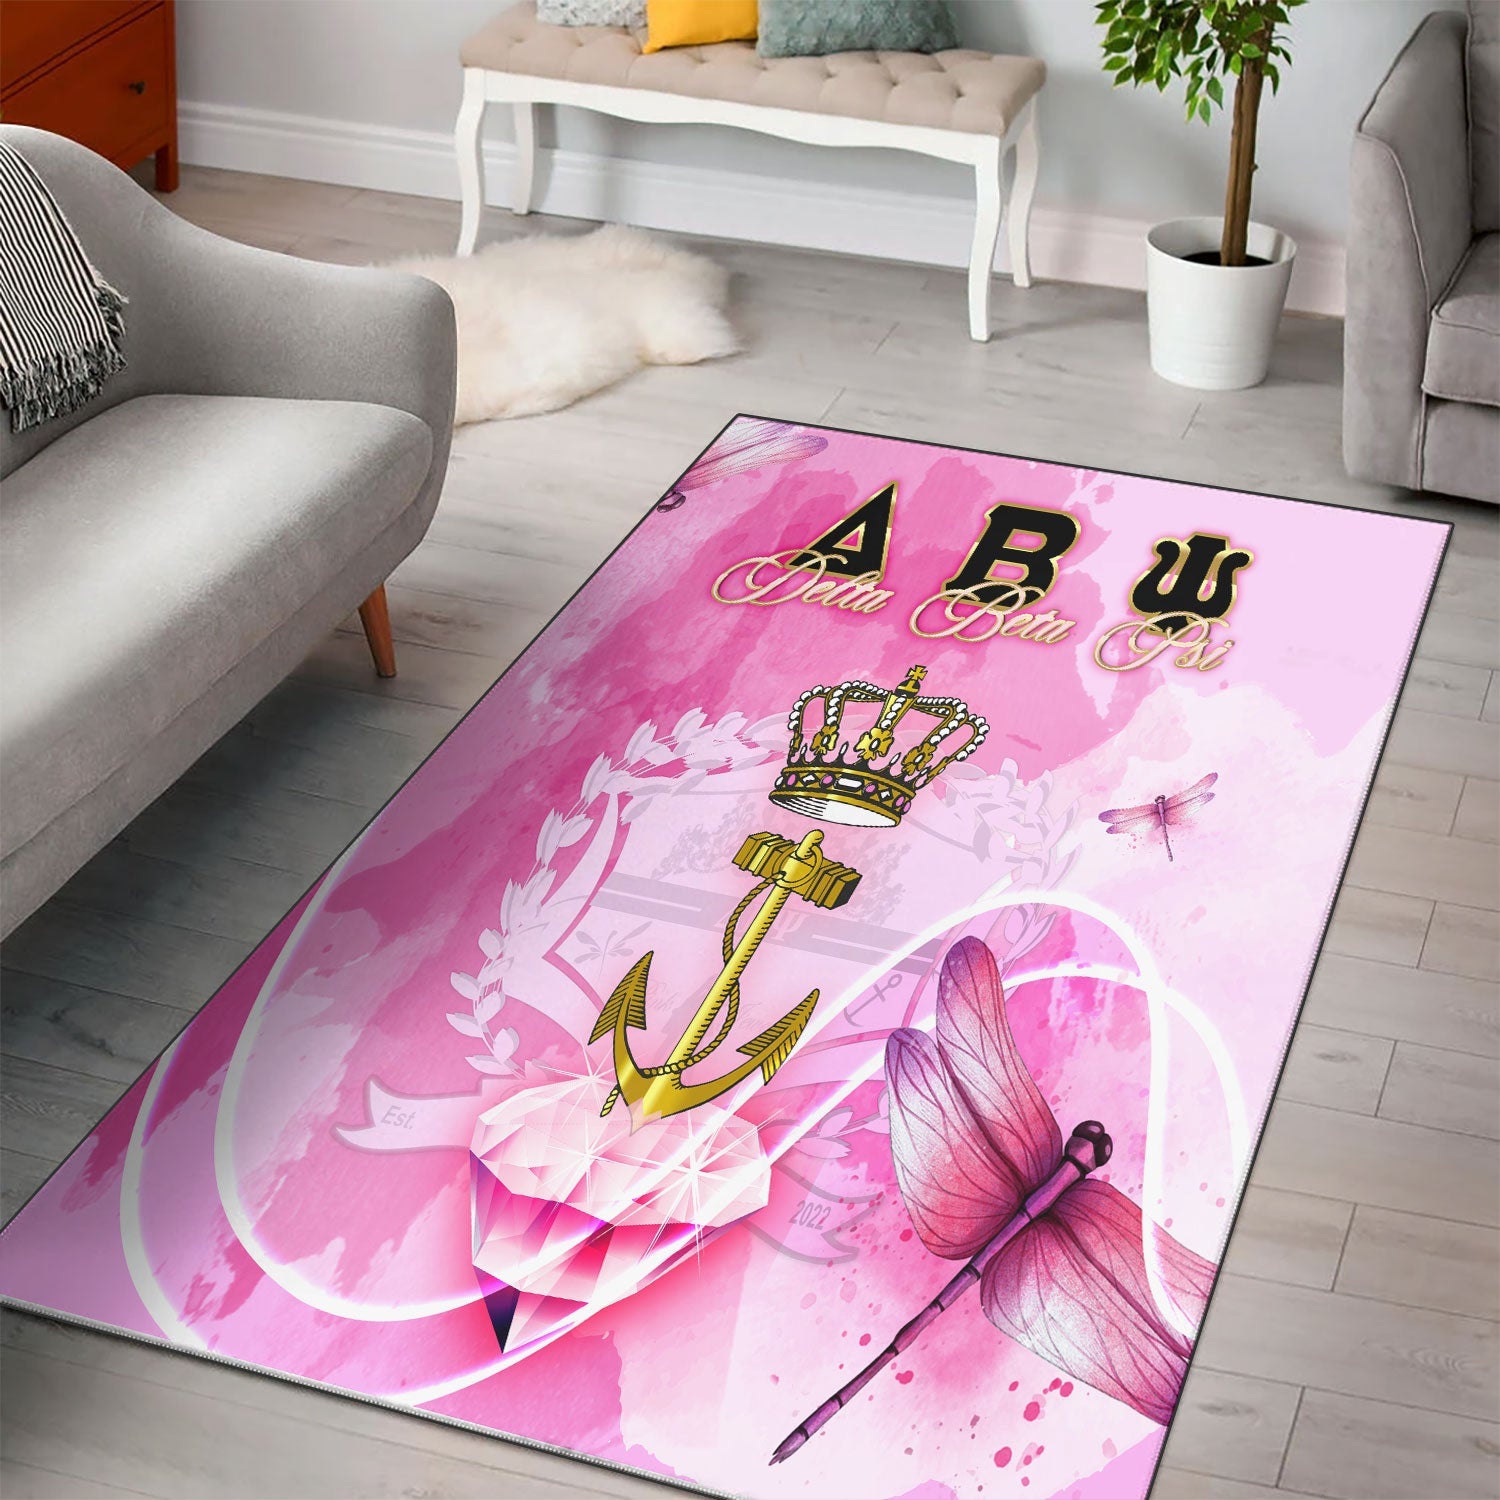 Sorority Area Rug - Delta Beta Psi Pink Dragonfly Style